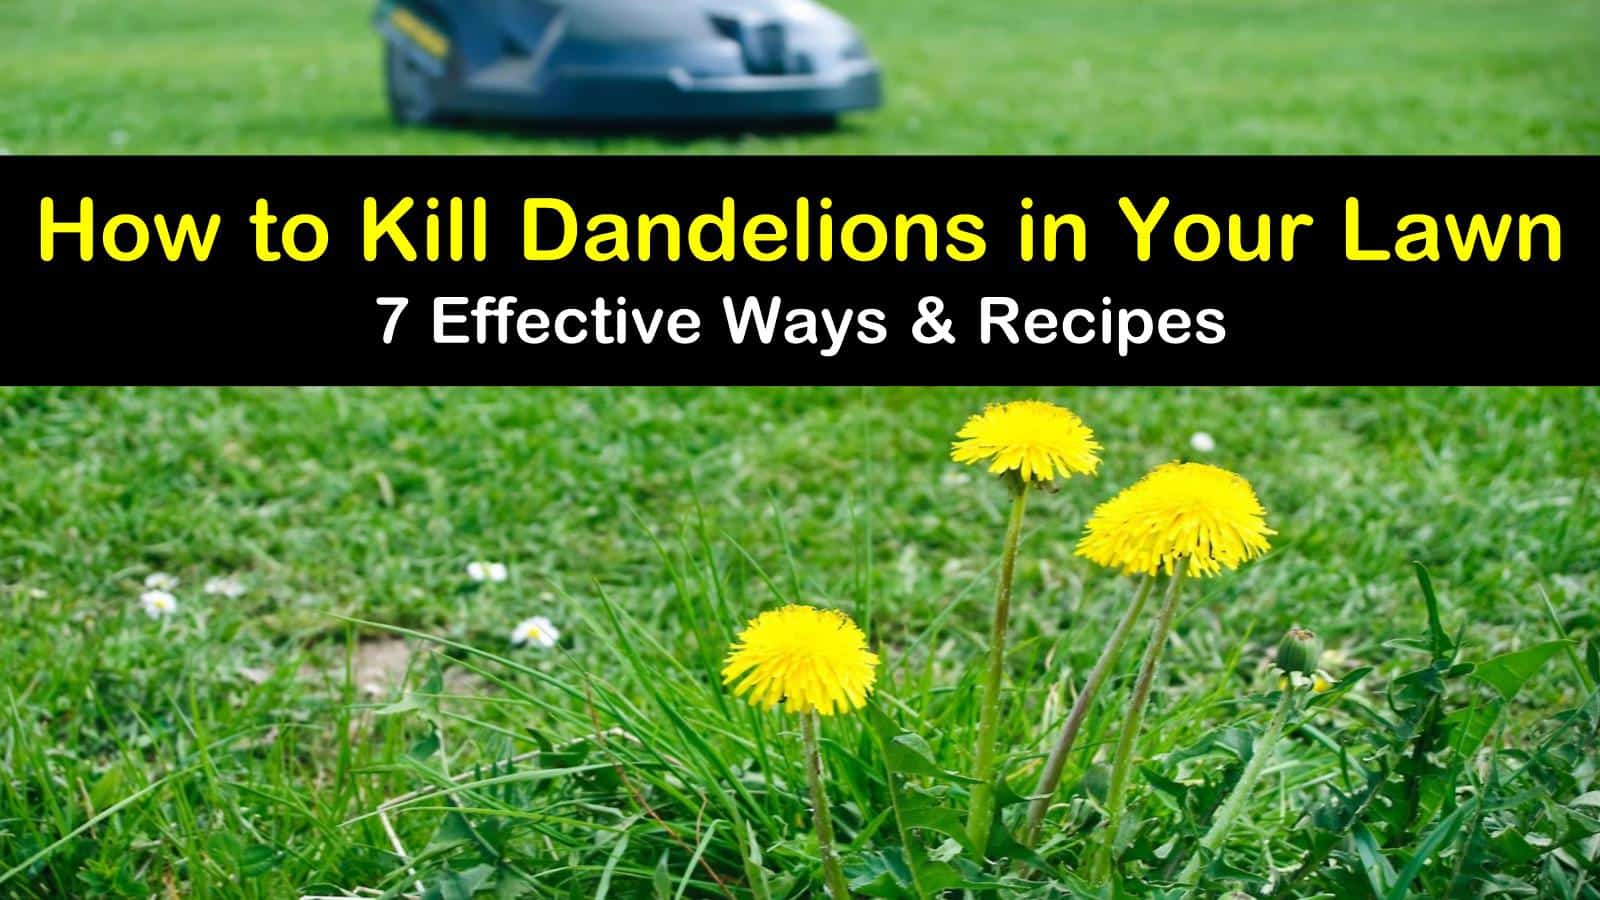 how to kill dandelions in your lawn titleimg1